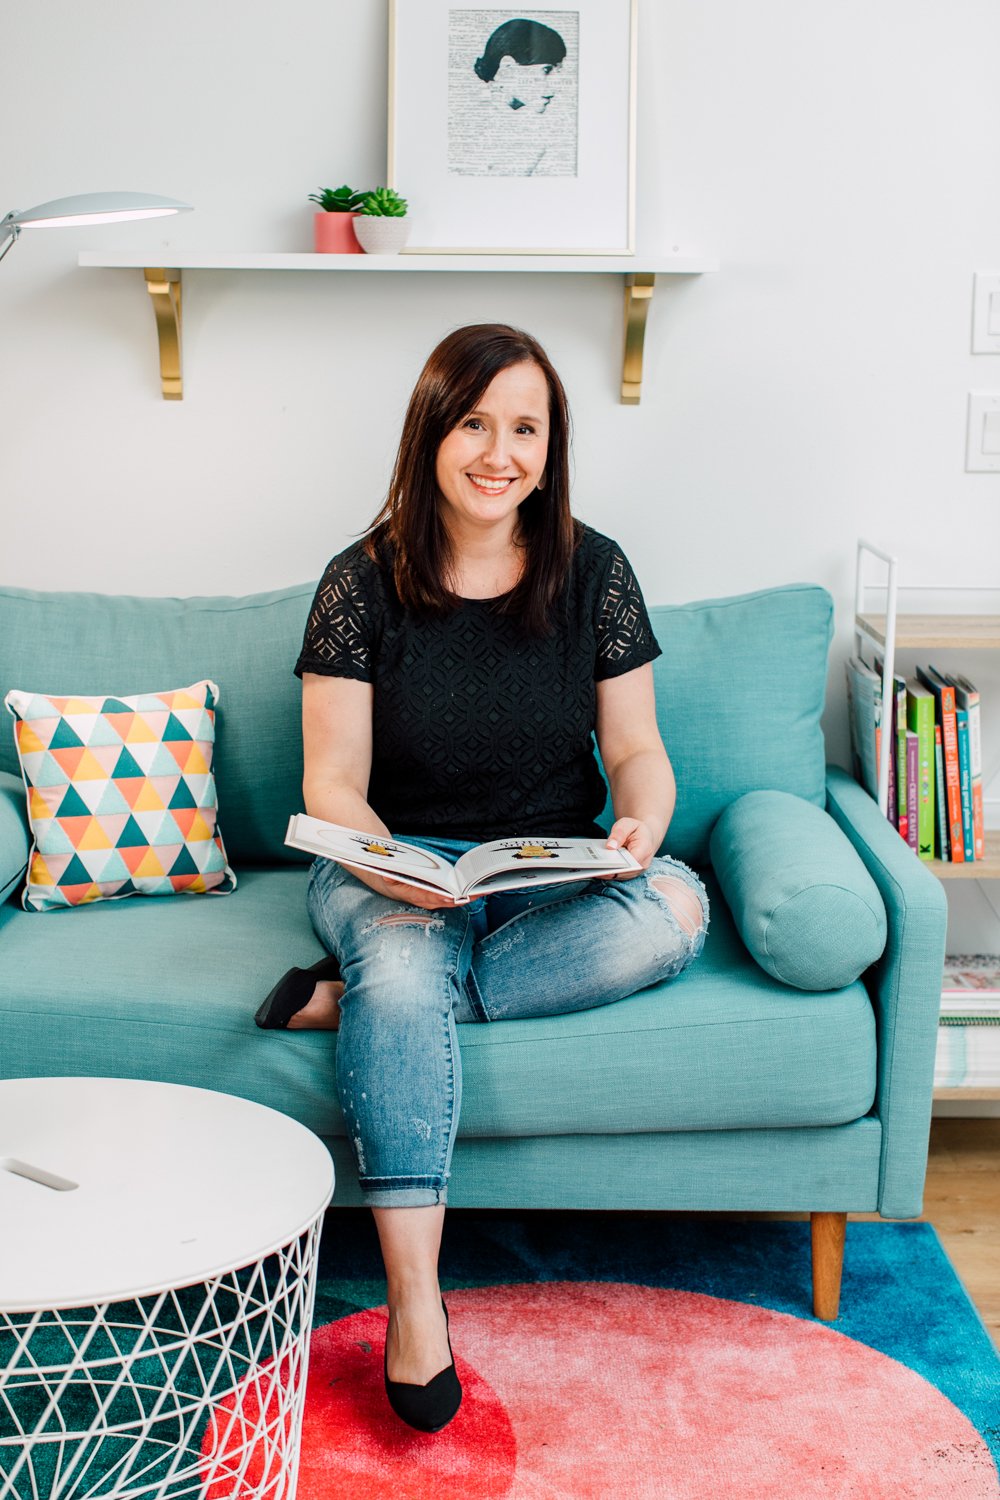 Craft room tour: Cori sitting on blue couch with a book open in her lap